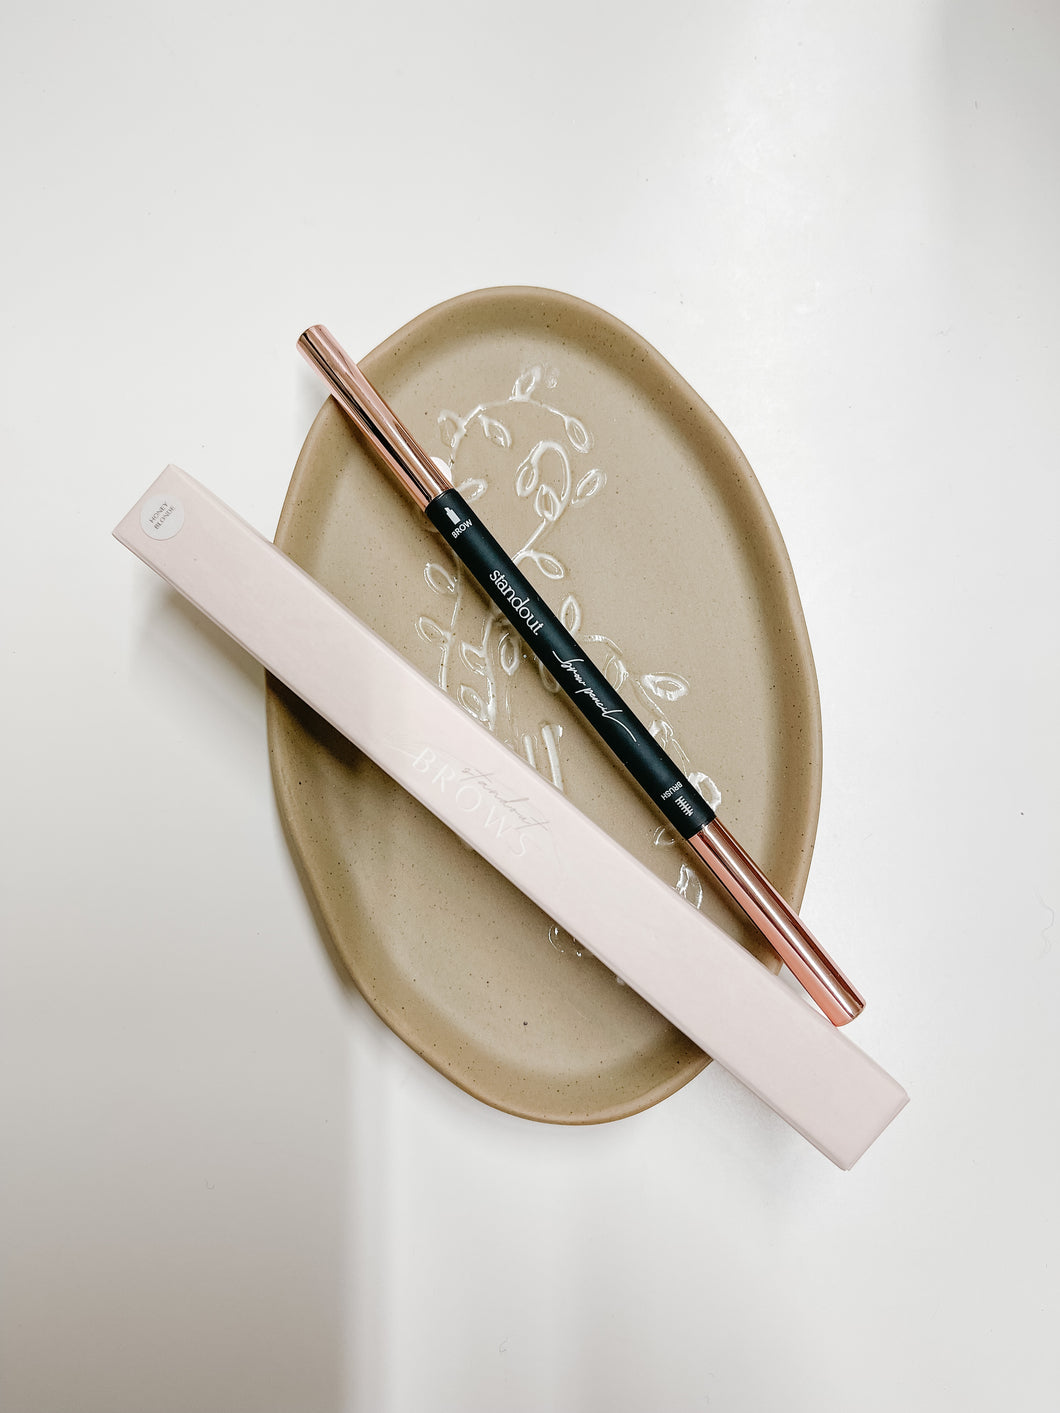 Standout Beauty Brow Pencil